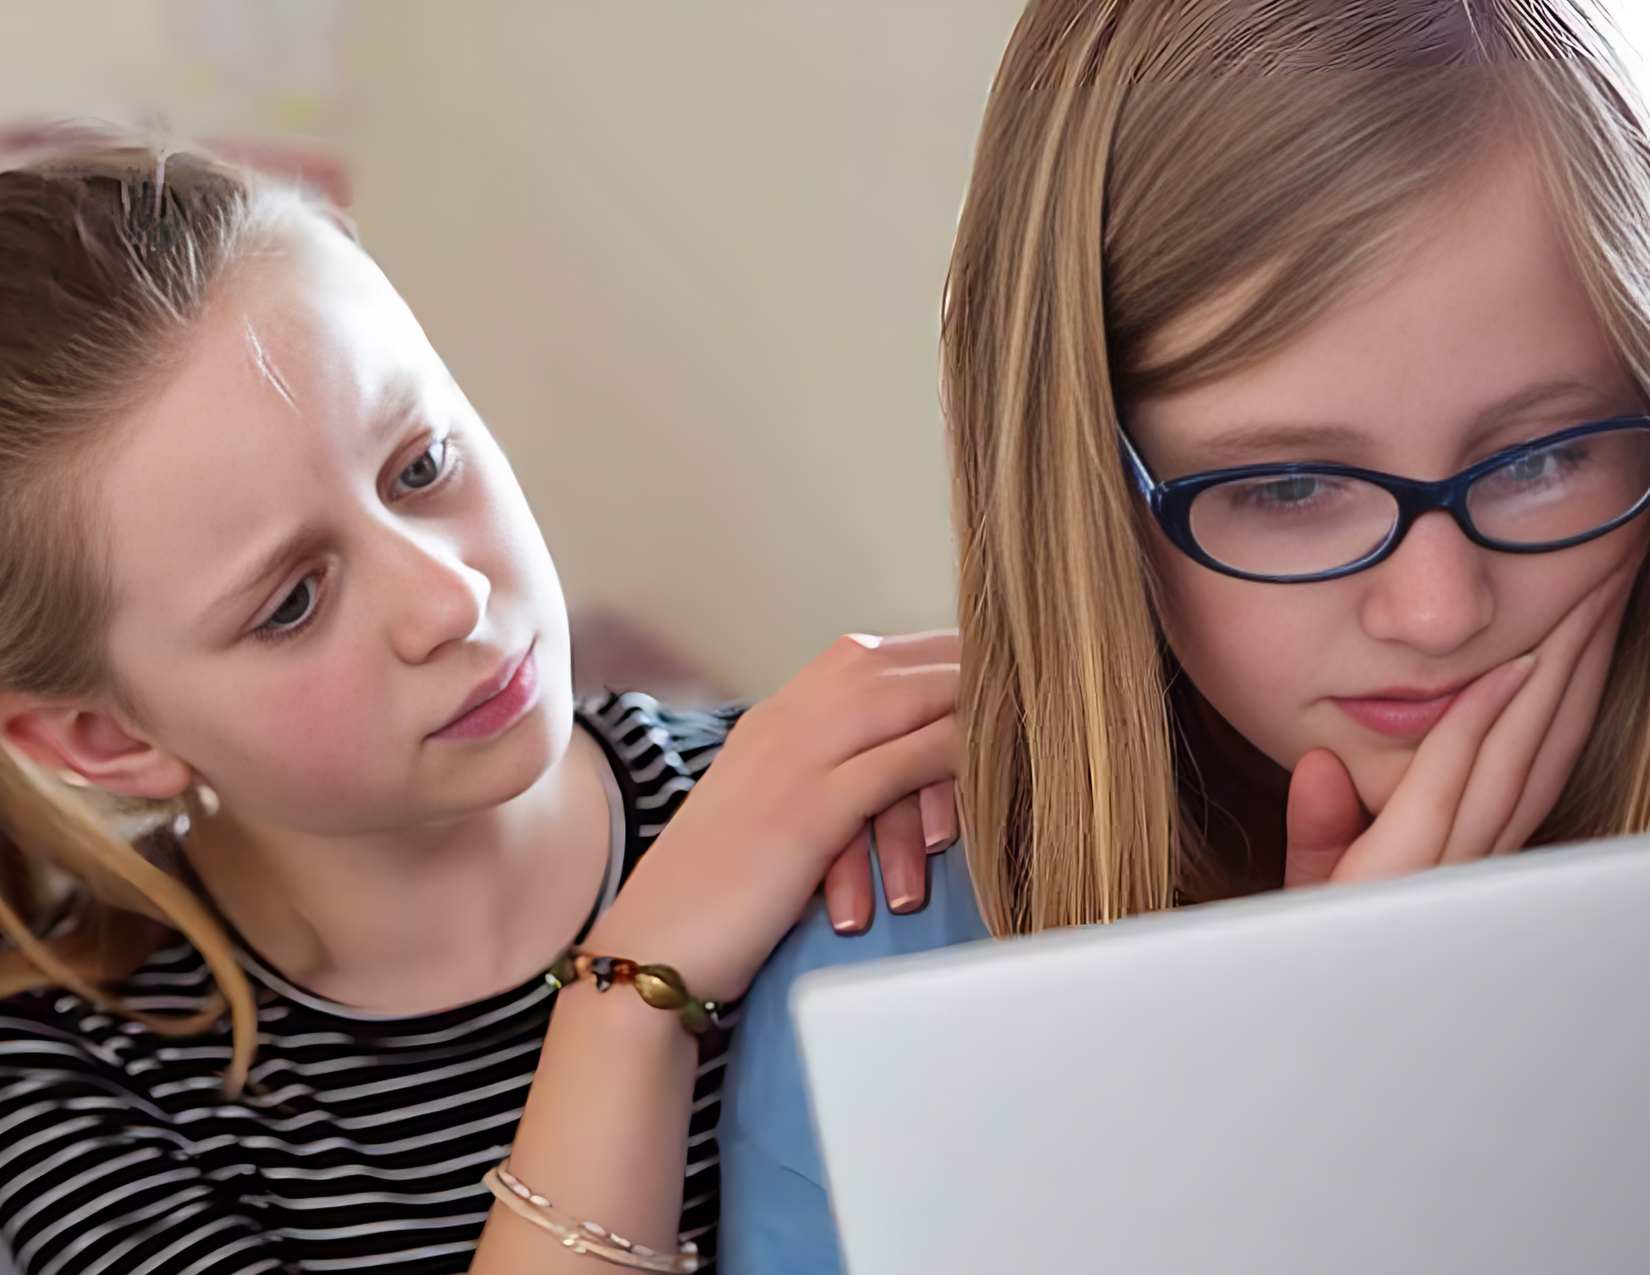 Read Cyberbullying at School: 5 Simple Steps to Protect Students